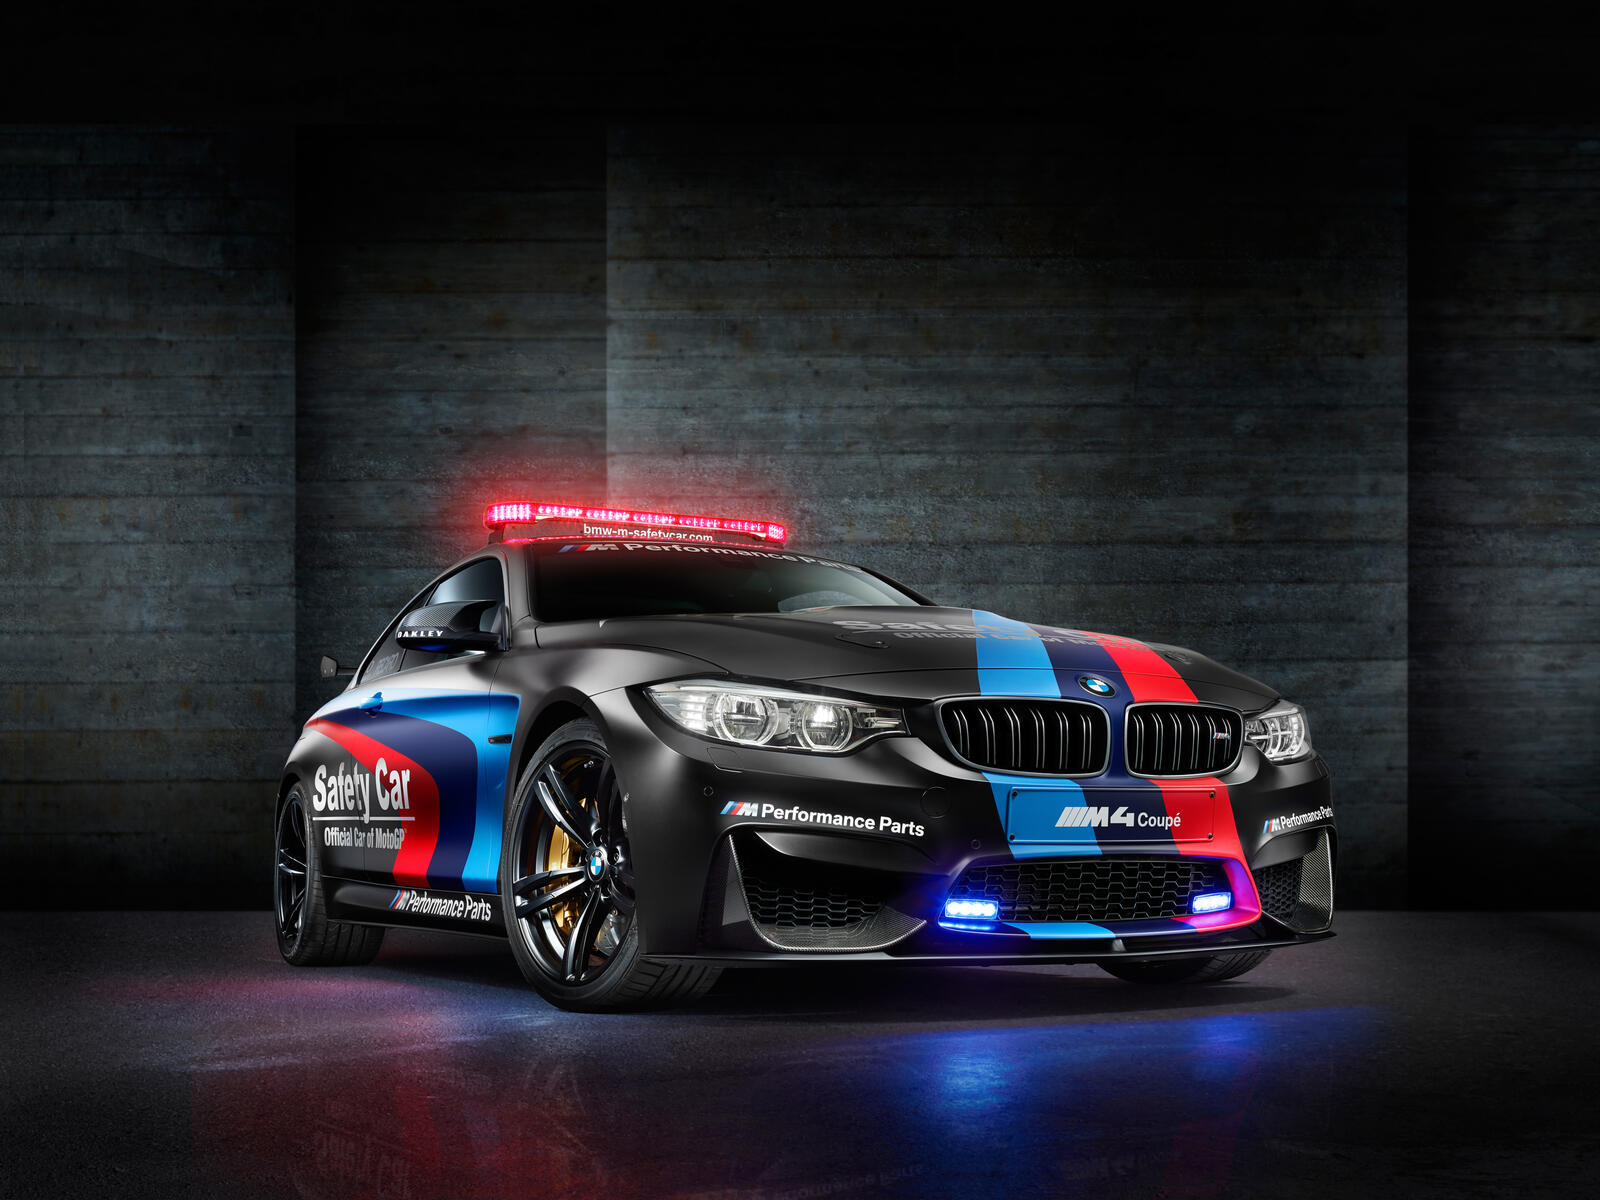 Free photo To download picture of 2015 bmw m4 coupe safety car